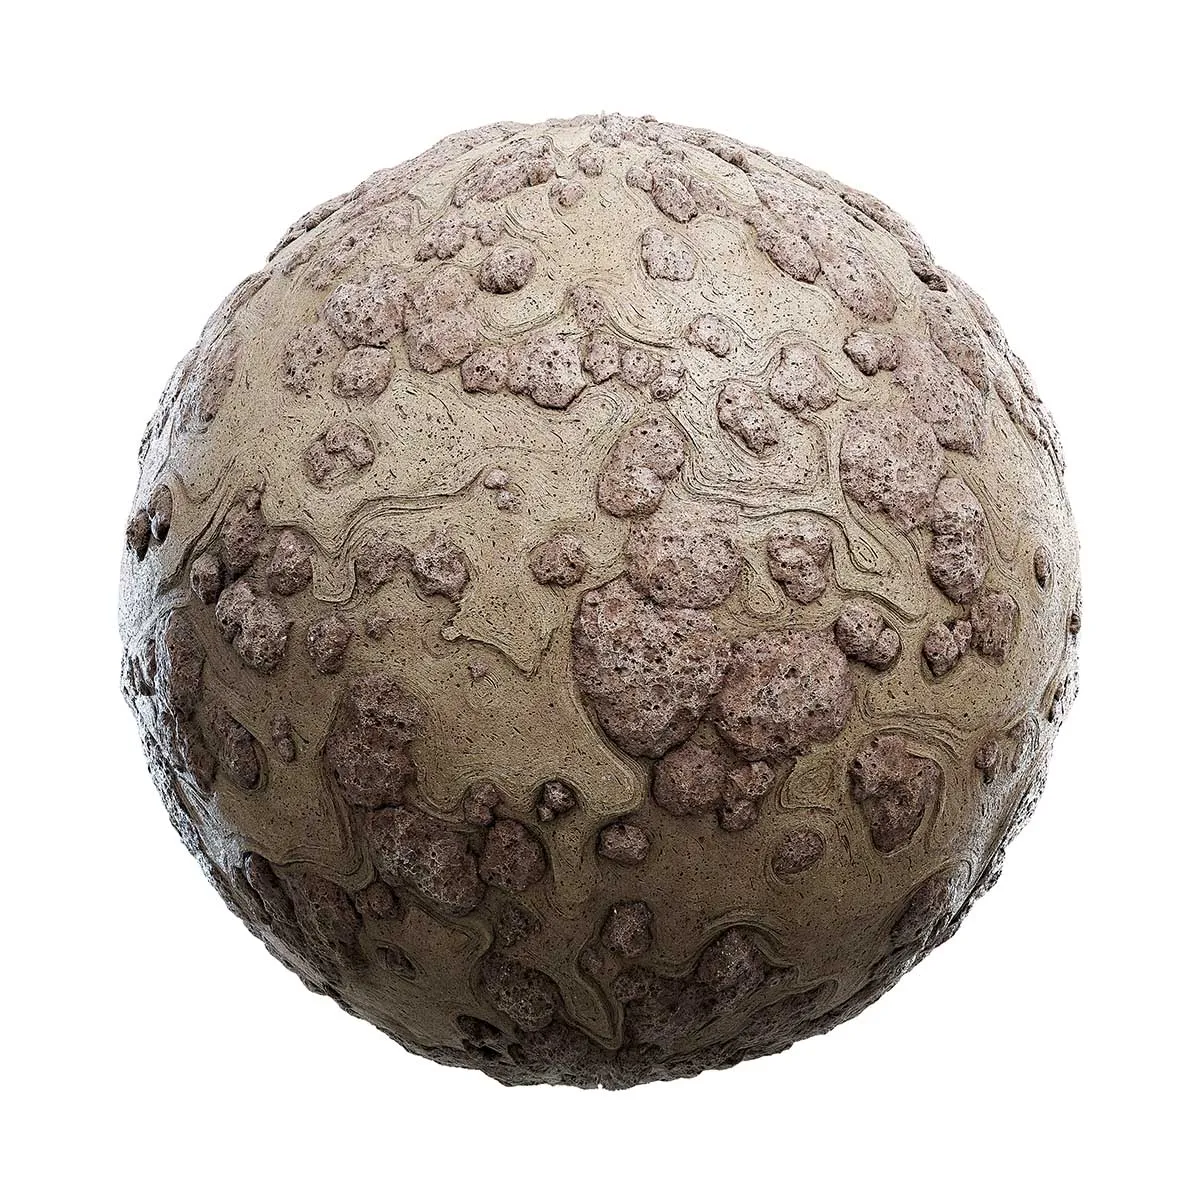 PBR Textures Volume 41 – Clay – 4K – 8K – dripping_beige_clay_with_stones_44_31